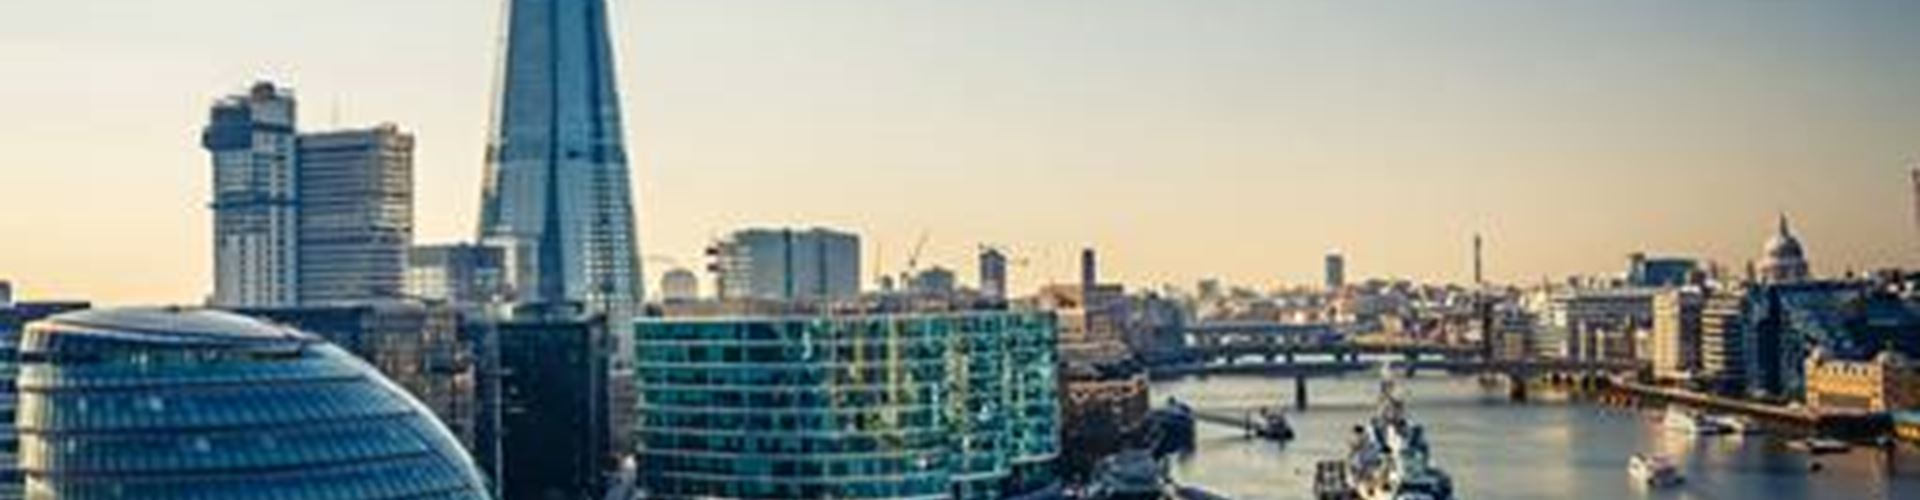 London construction boosts UK economy by £6.2bn, shows study